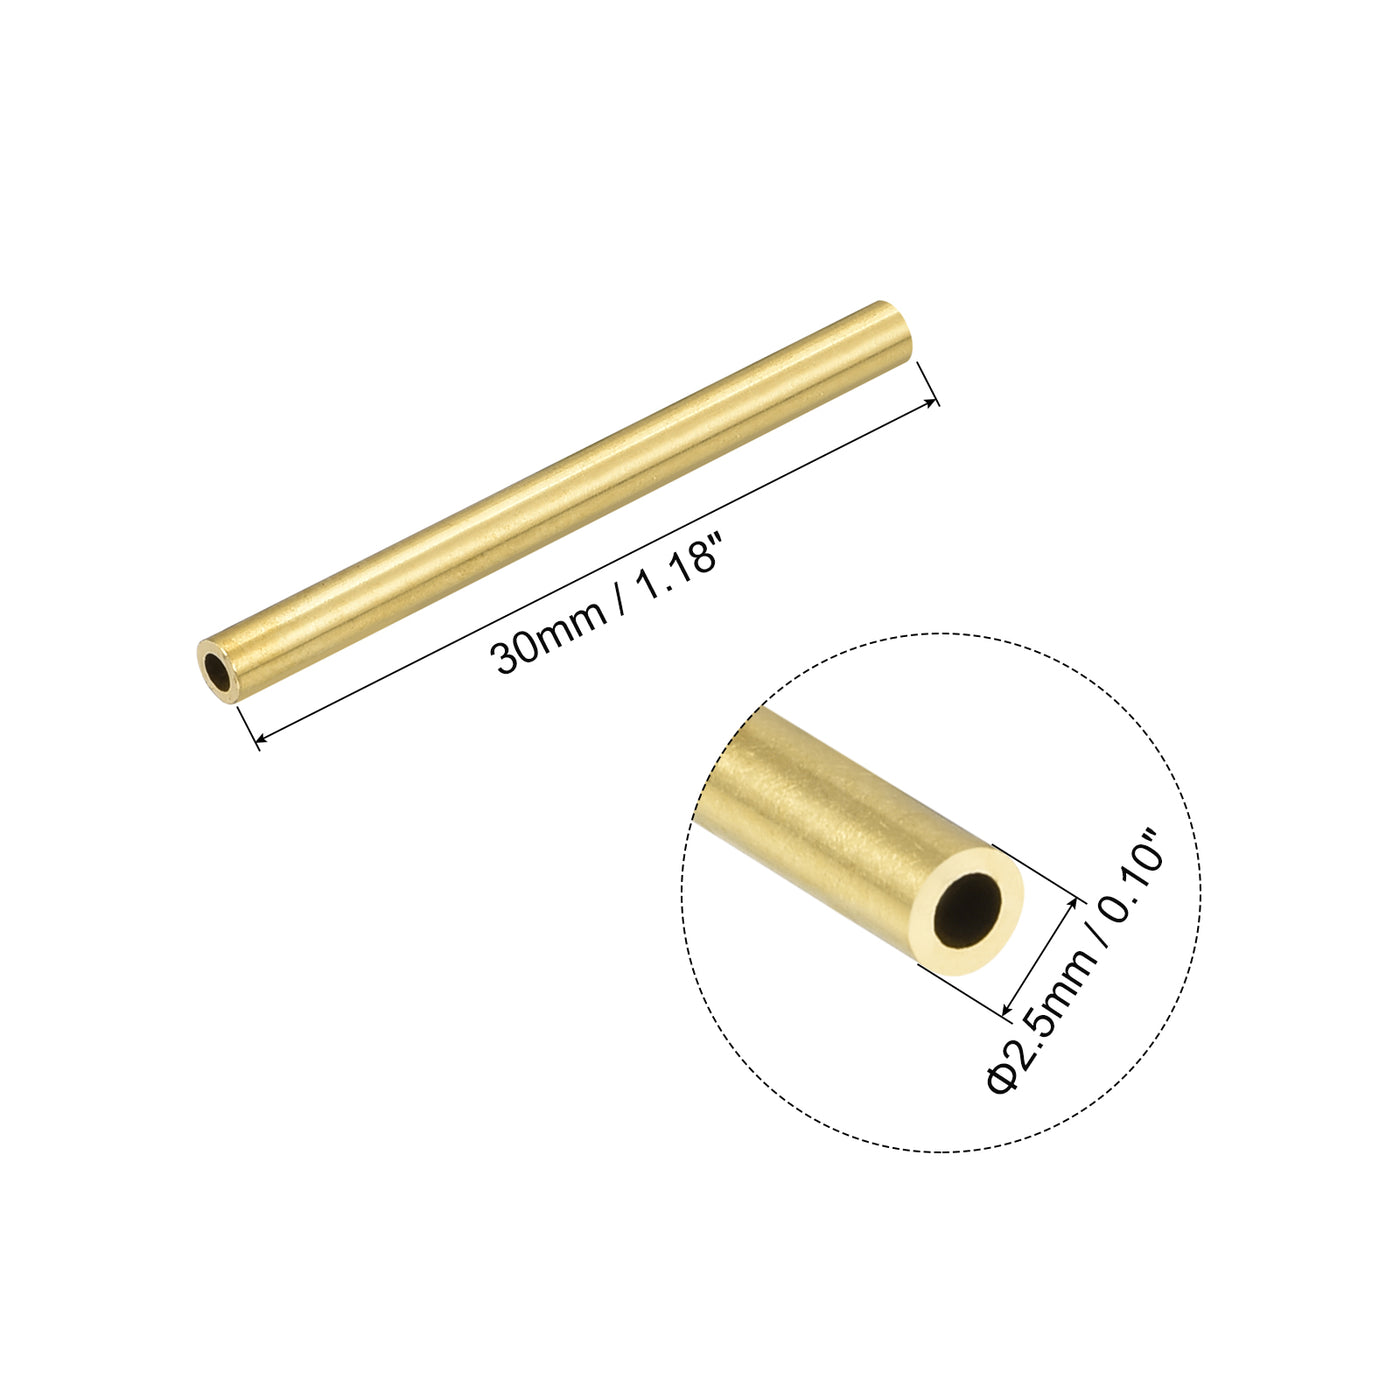 Uxcell Uxcell Brass Tube 4.5mm OD 0.5mm Wall Thickness 30mm Length Pipe Tubing for DIY 30 Pcs